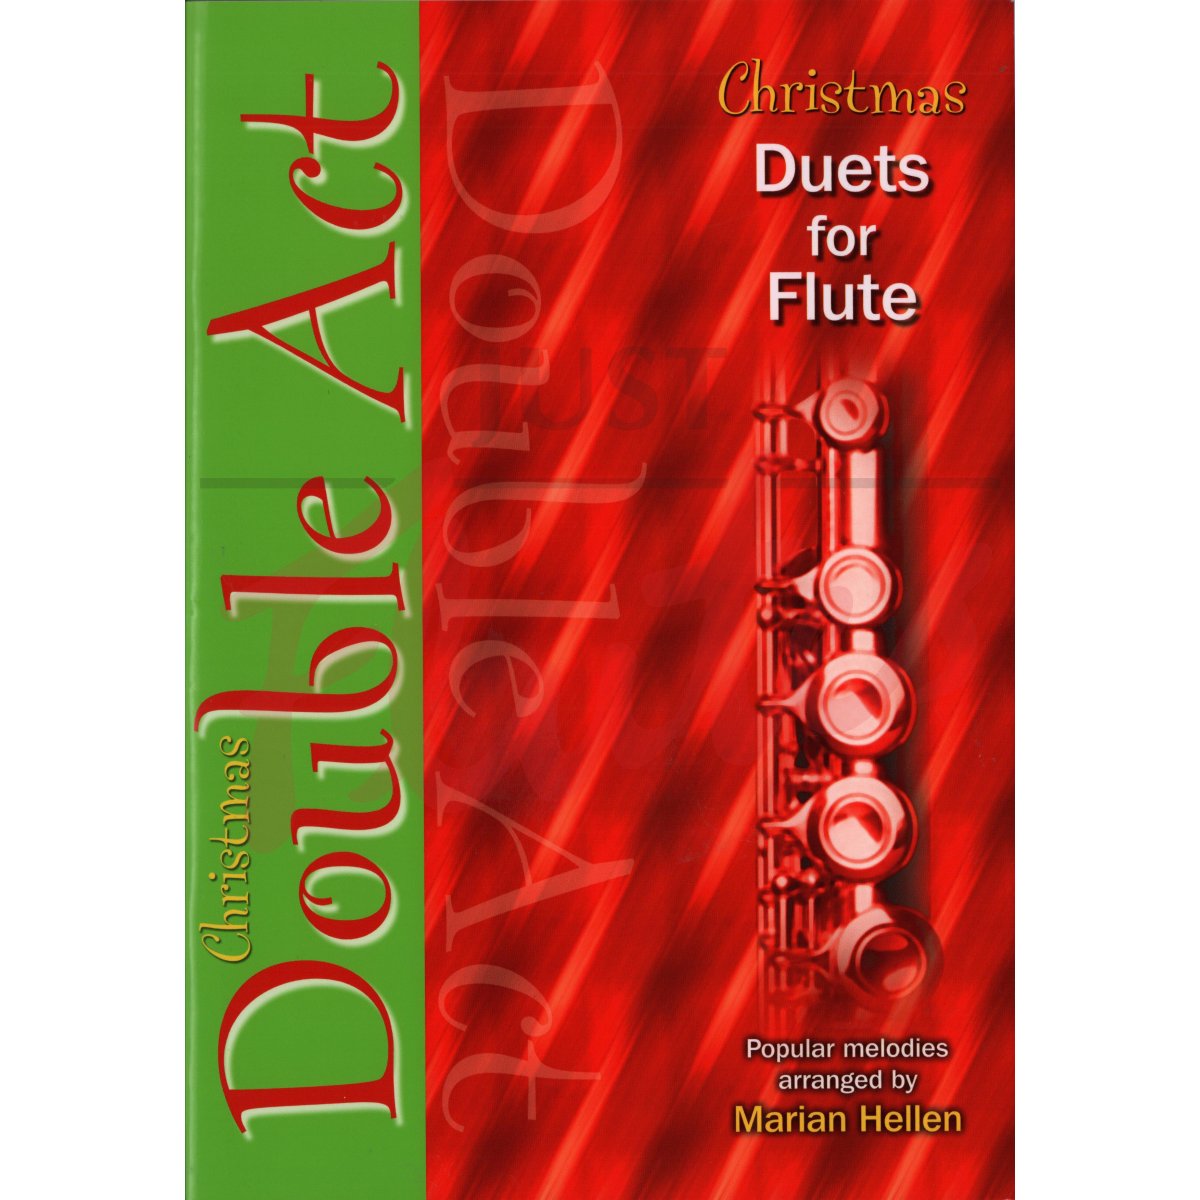 Christmas Double Act: Duets for Flute